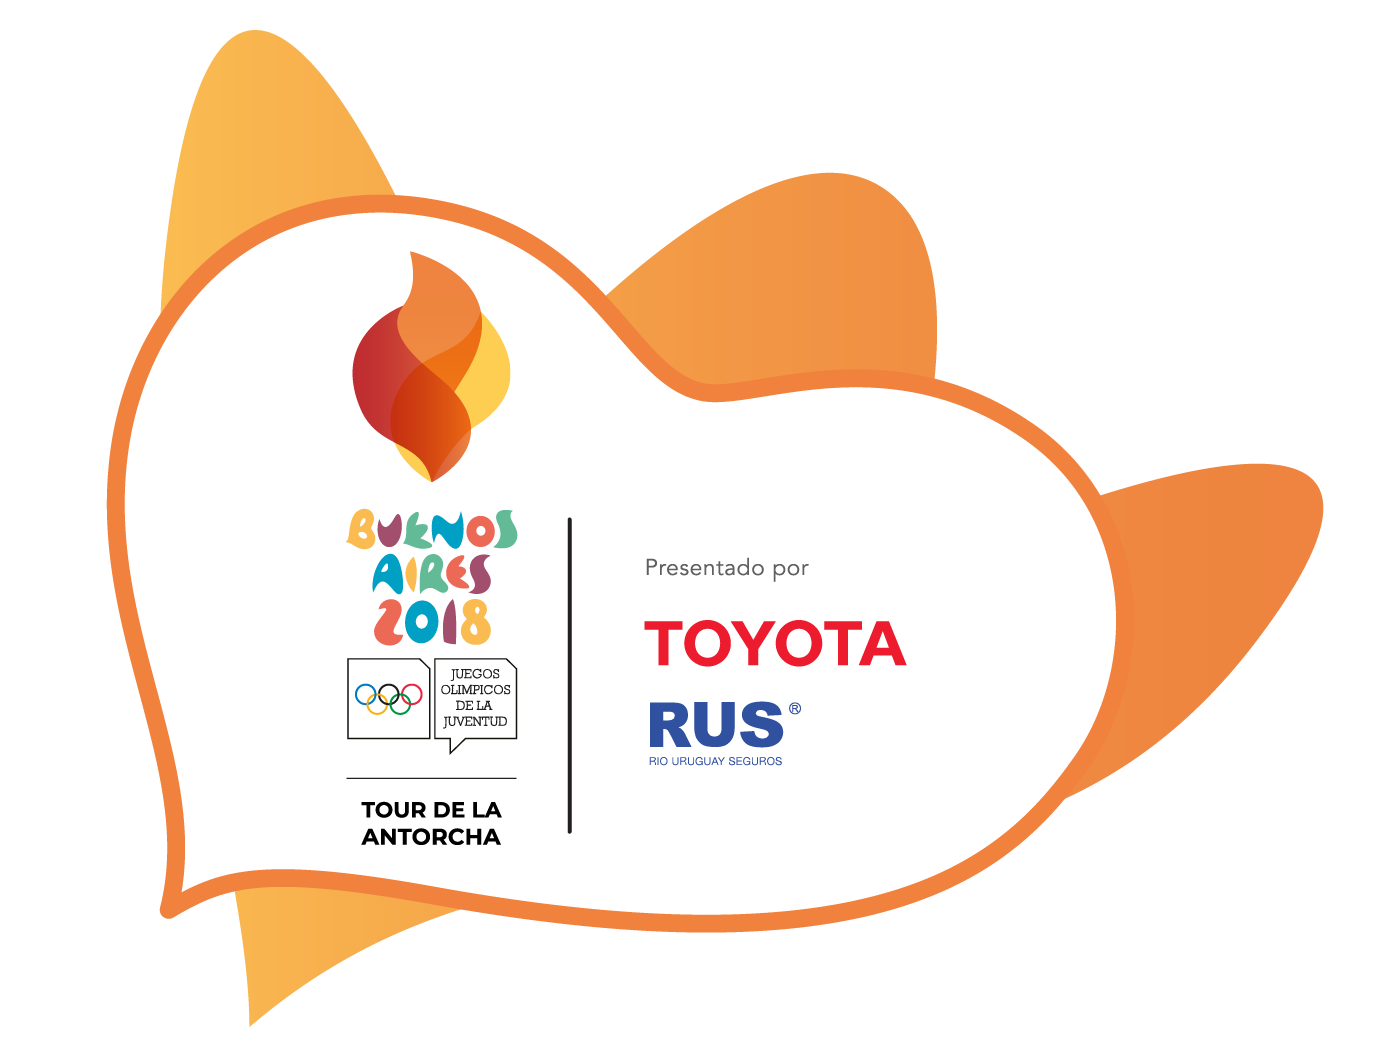 Buenos Aires 2018 Youth Olympic Games - Toyota and Rio Uruguay Seguros to be Torch Tour partners